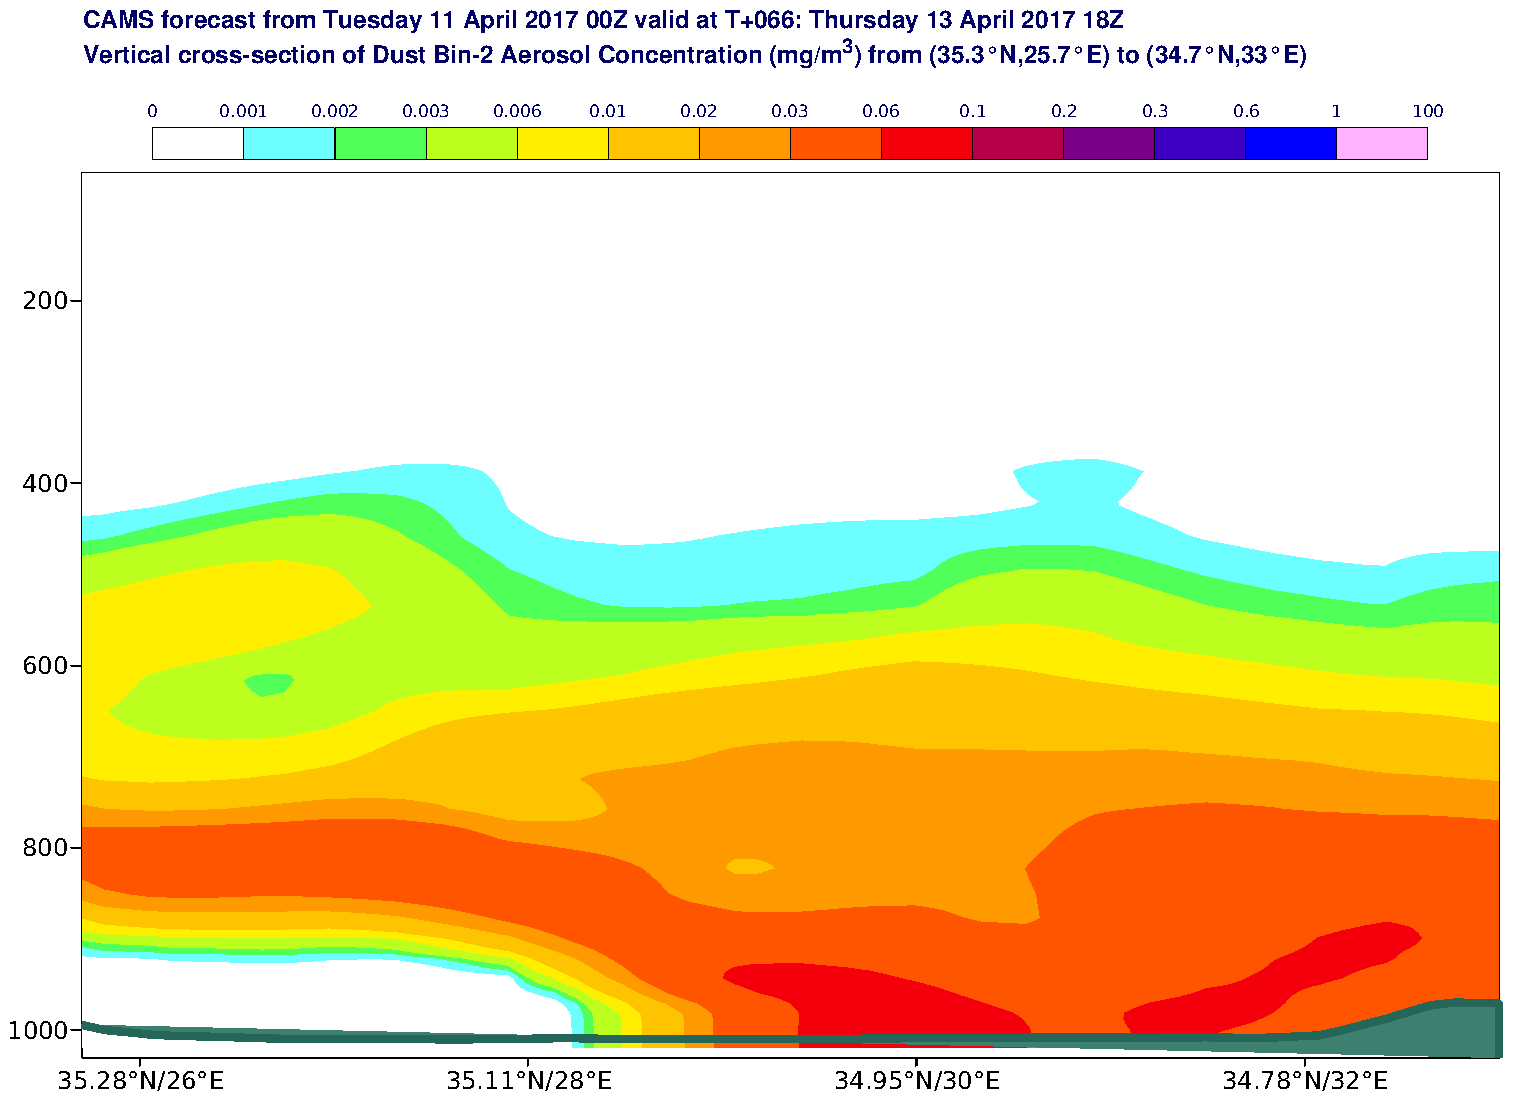 Vertical cross-section of Dust Bin-2 Aerosol Concentration (mg/m3) valid at T66 - 2017-04-13 18:00